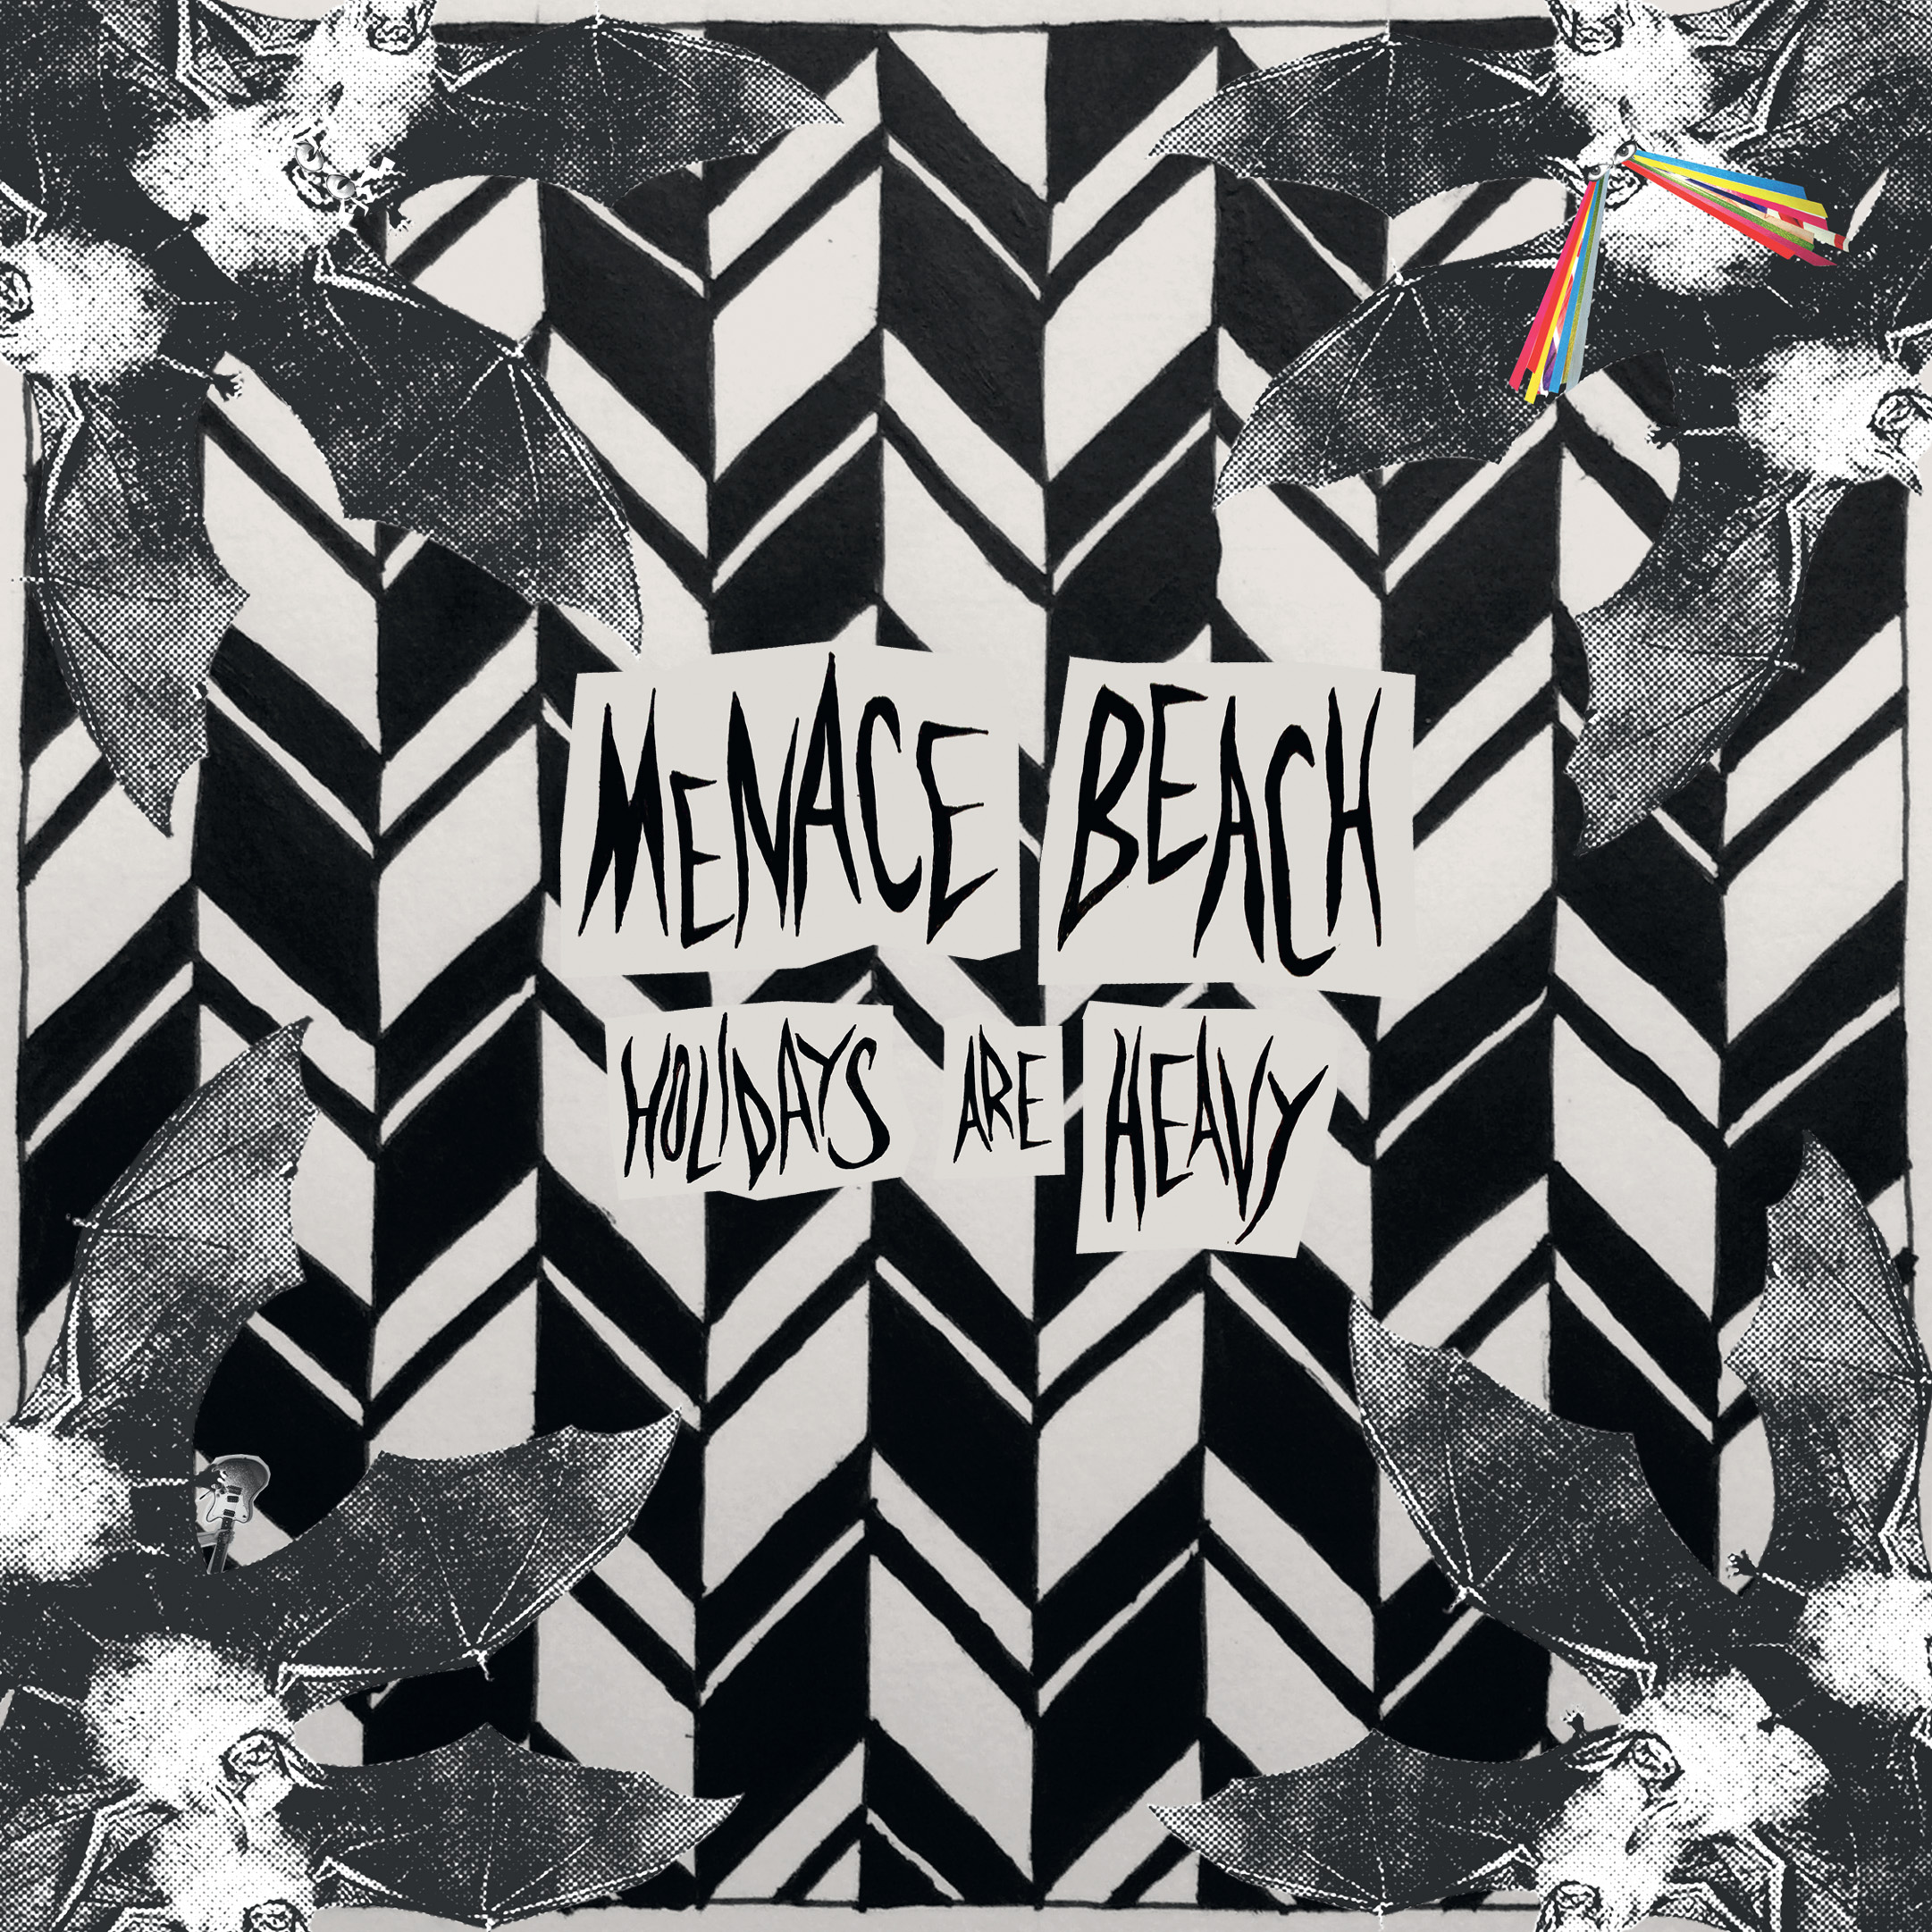 Menace Beach shoot for a starry night on 'Holidays Are Heavy'